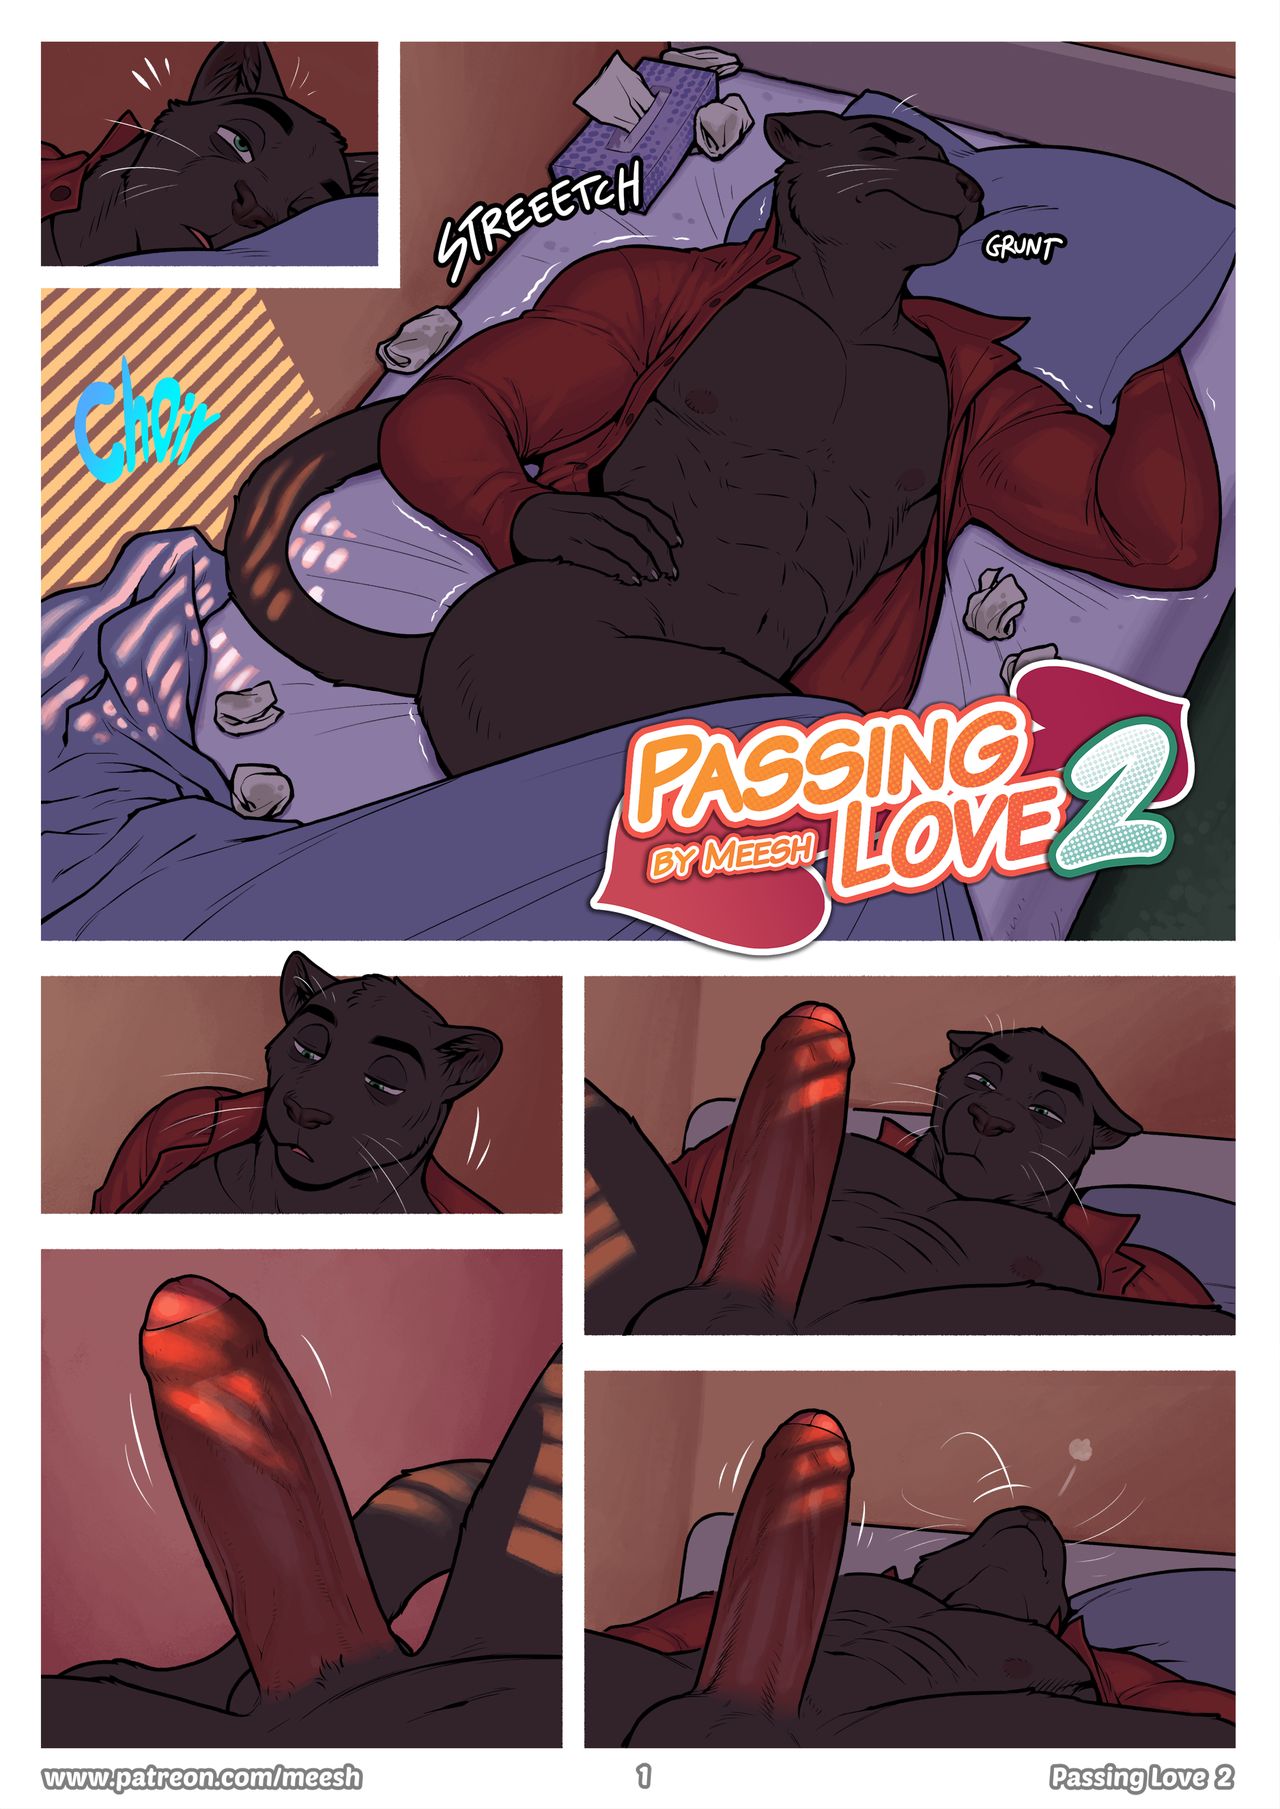 [Meesh] Passing Love 2 (Ongoing) [Chinese] [落道汉化] 